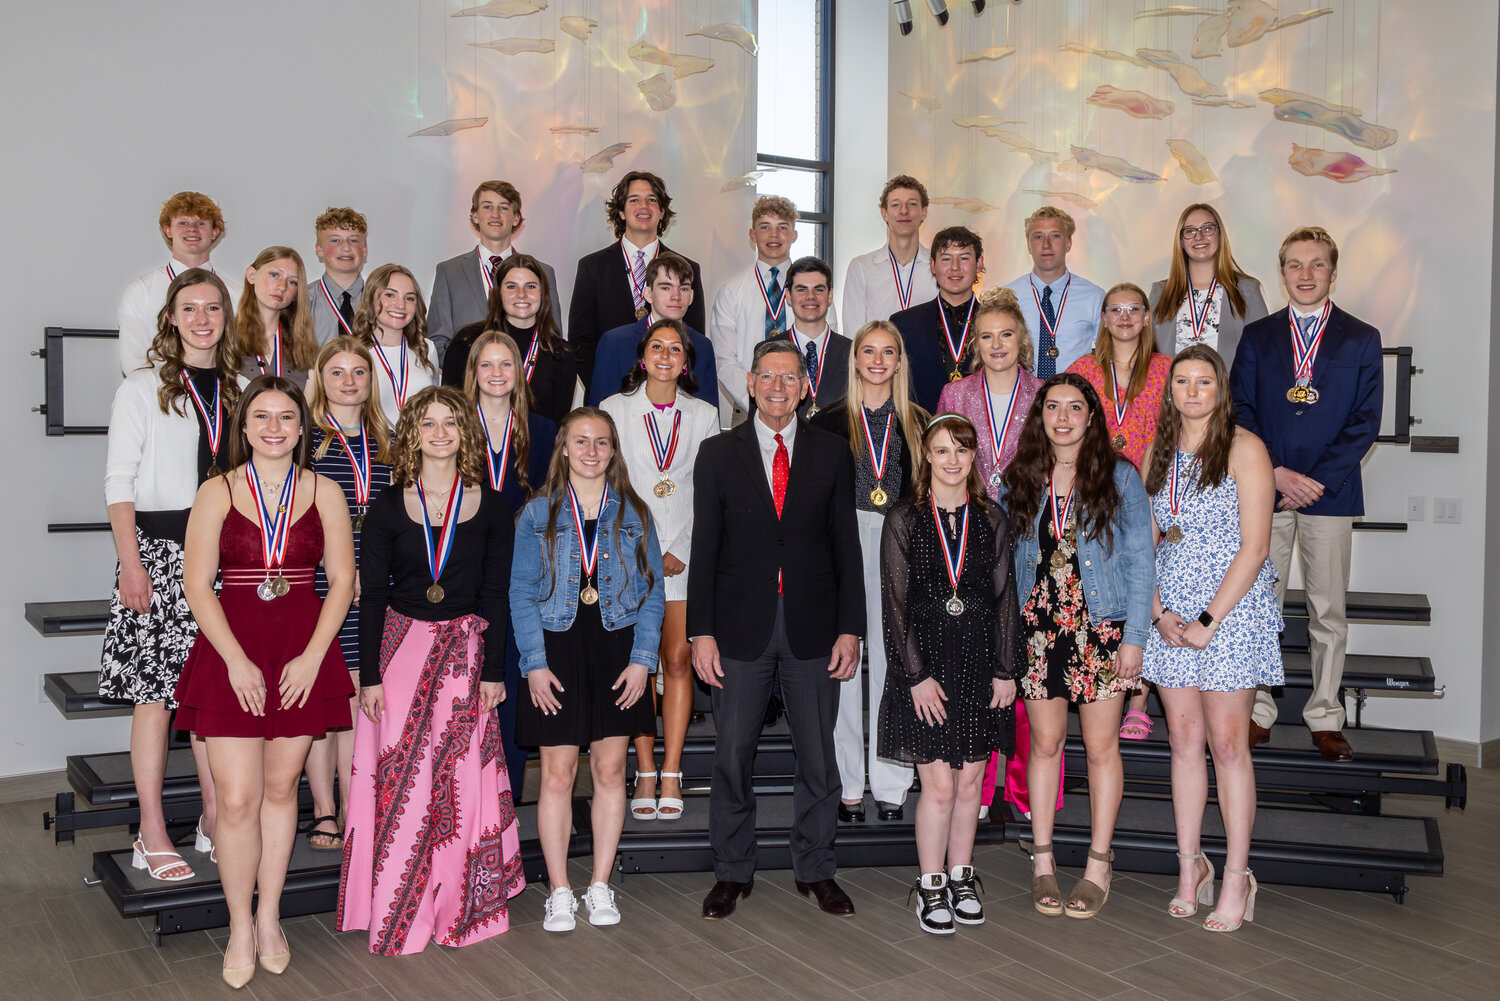 Sen. John Barrasso, center, and 28 of the 34 Wyoming Congressional Award recipients pose with their medals following a special ceremony on Sunday, April 21. Among the honorees are Pinedale High School senior Seren Noble, a silver medalist, (second row back and second to the right) and Big Piney High School sophomore Cambry Jenks (not pictured), a gold medalist.